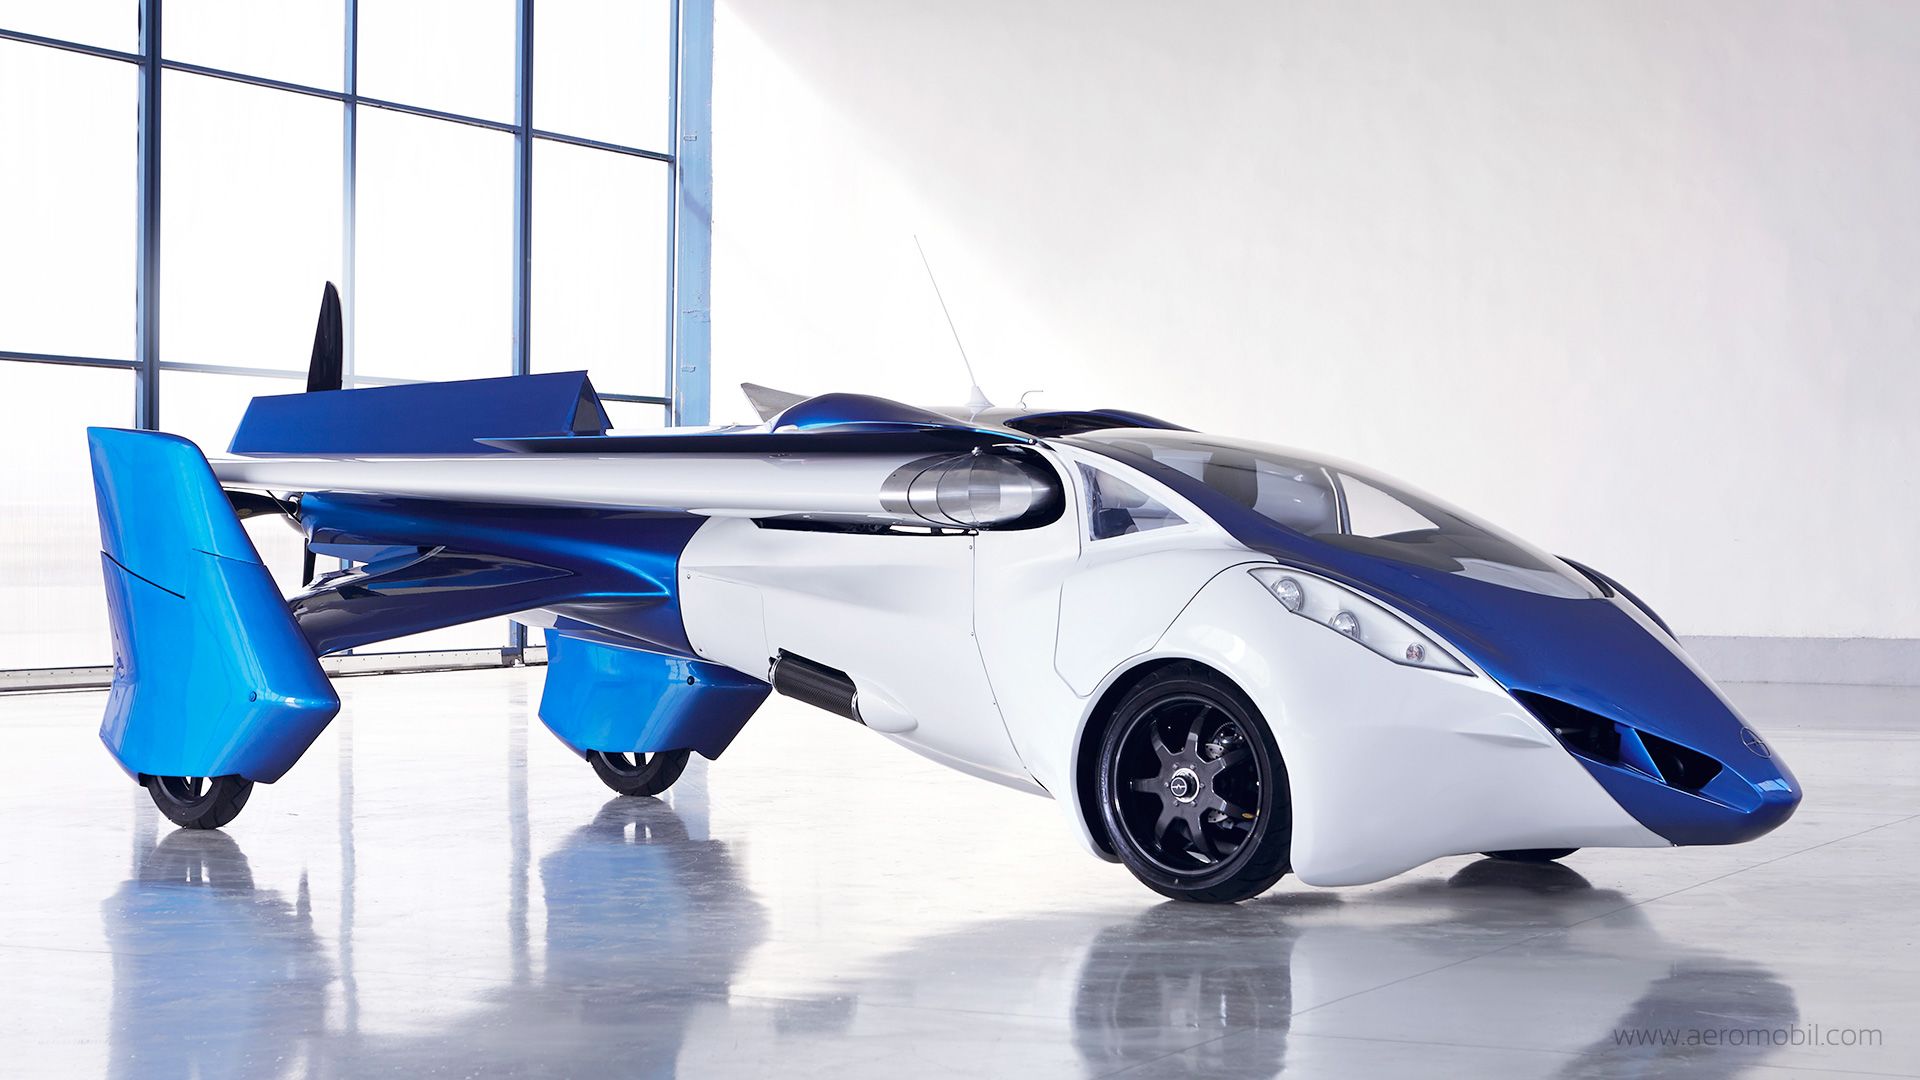 India Sector 110 Cc Xxx Videos - The race is on for flying car start ups | CNN Business